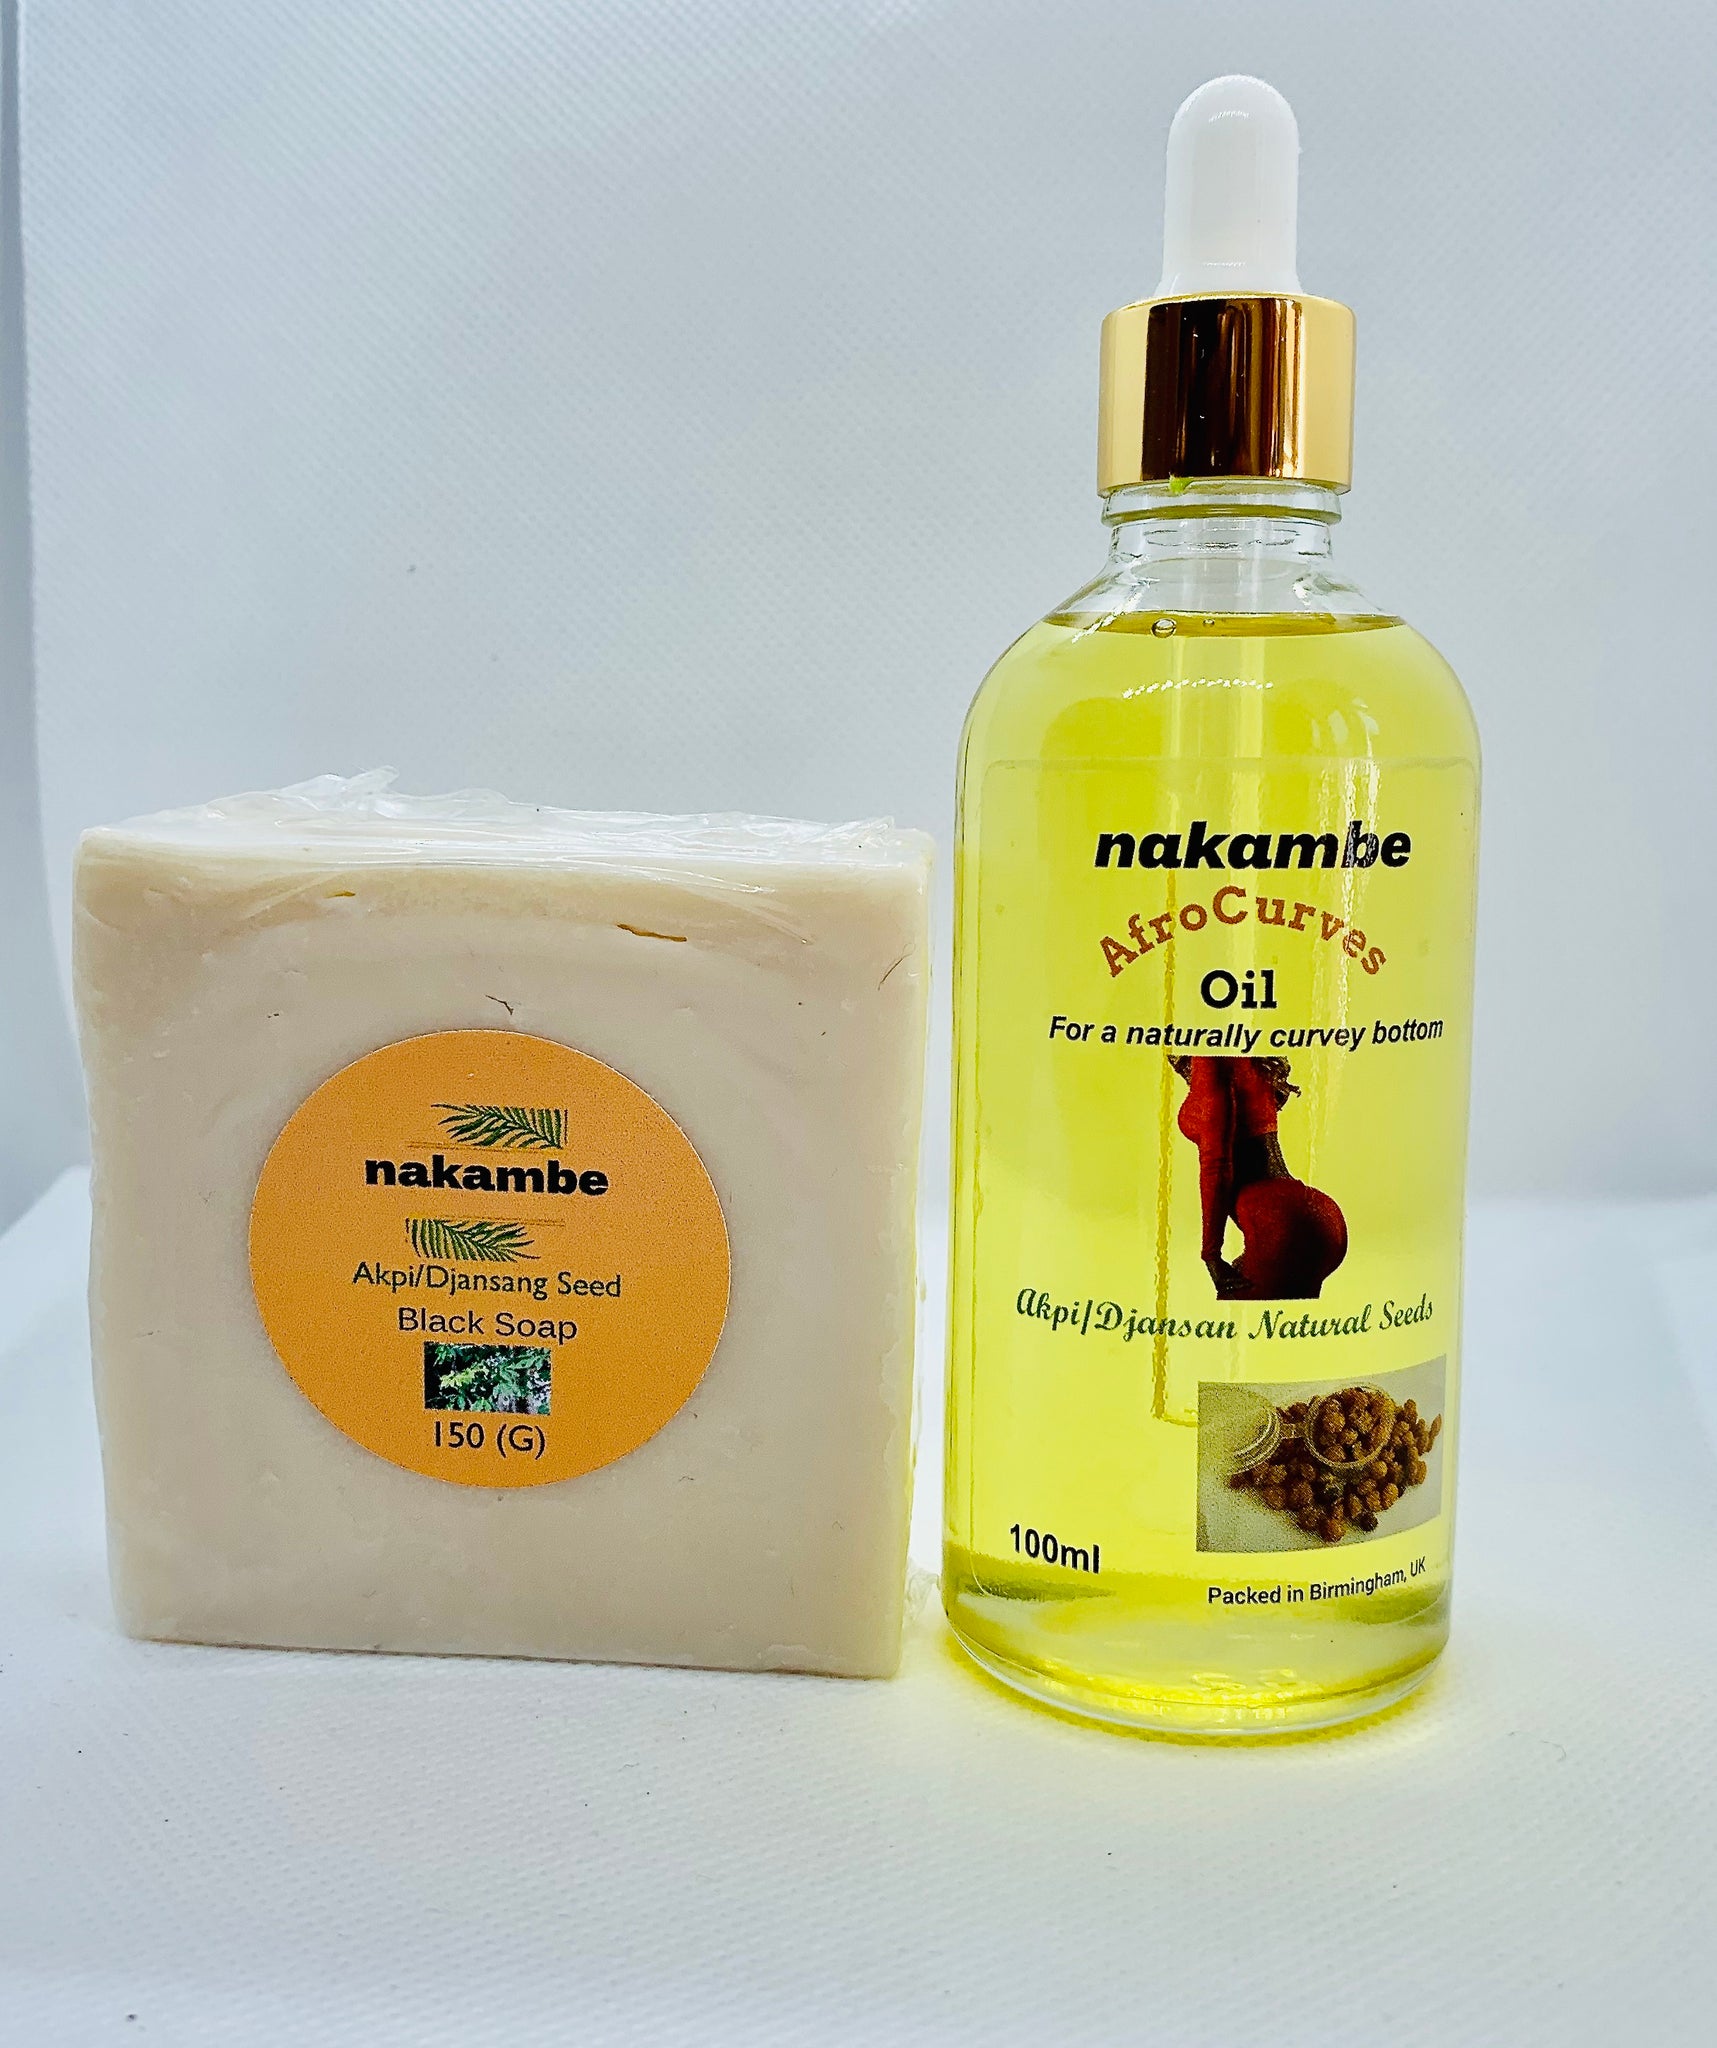 Akpi Butt Oil and Black Soap with Akpi Bundle 100ml+250g – Nakambe